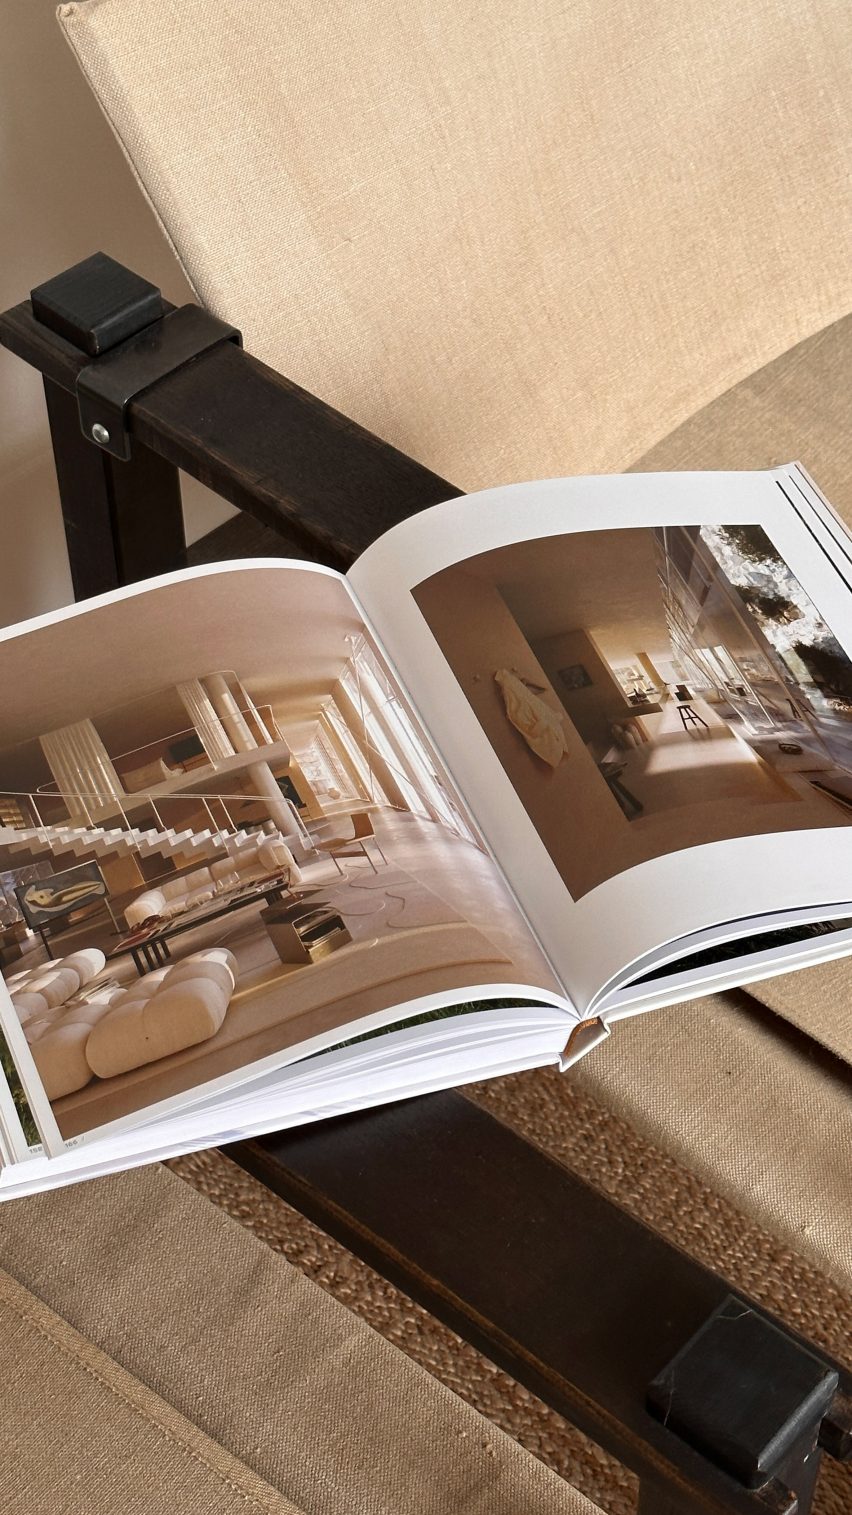 Rendered images in the Design Dreams book by Charlotte Taylor